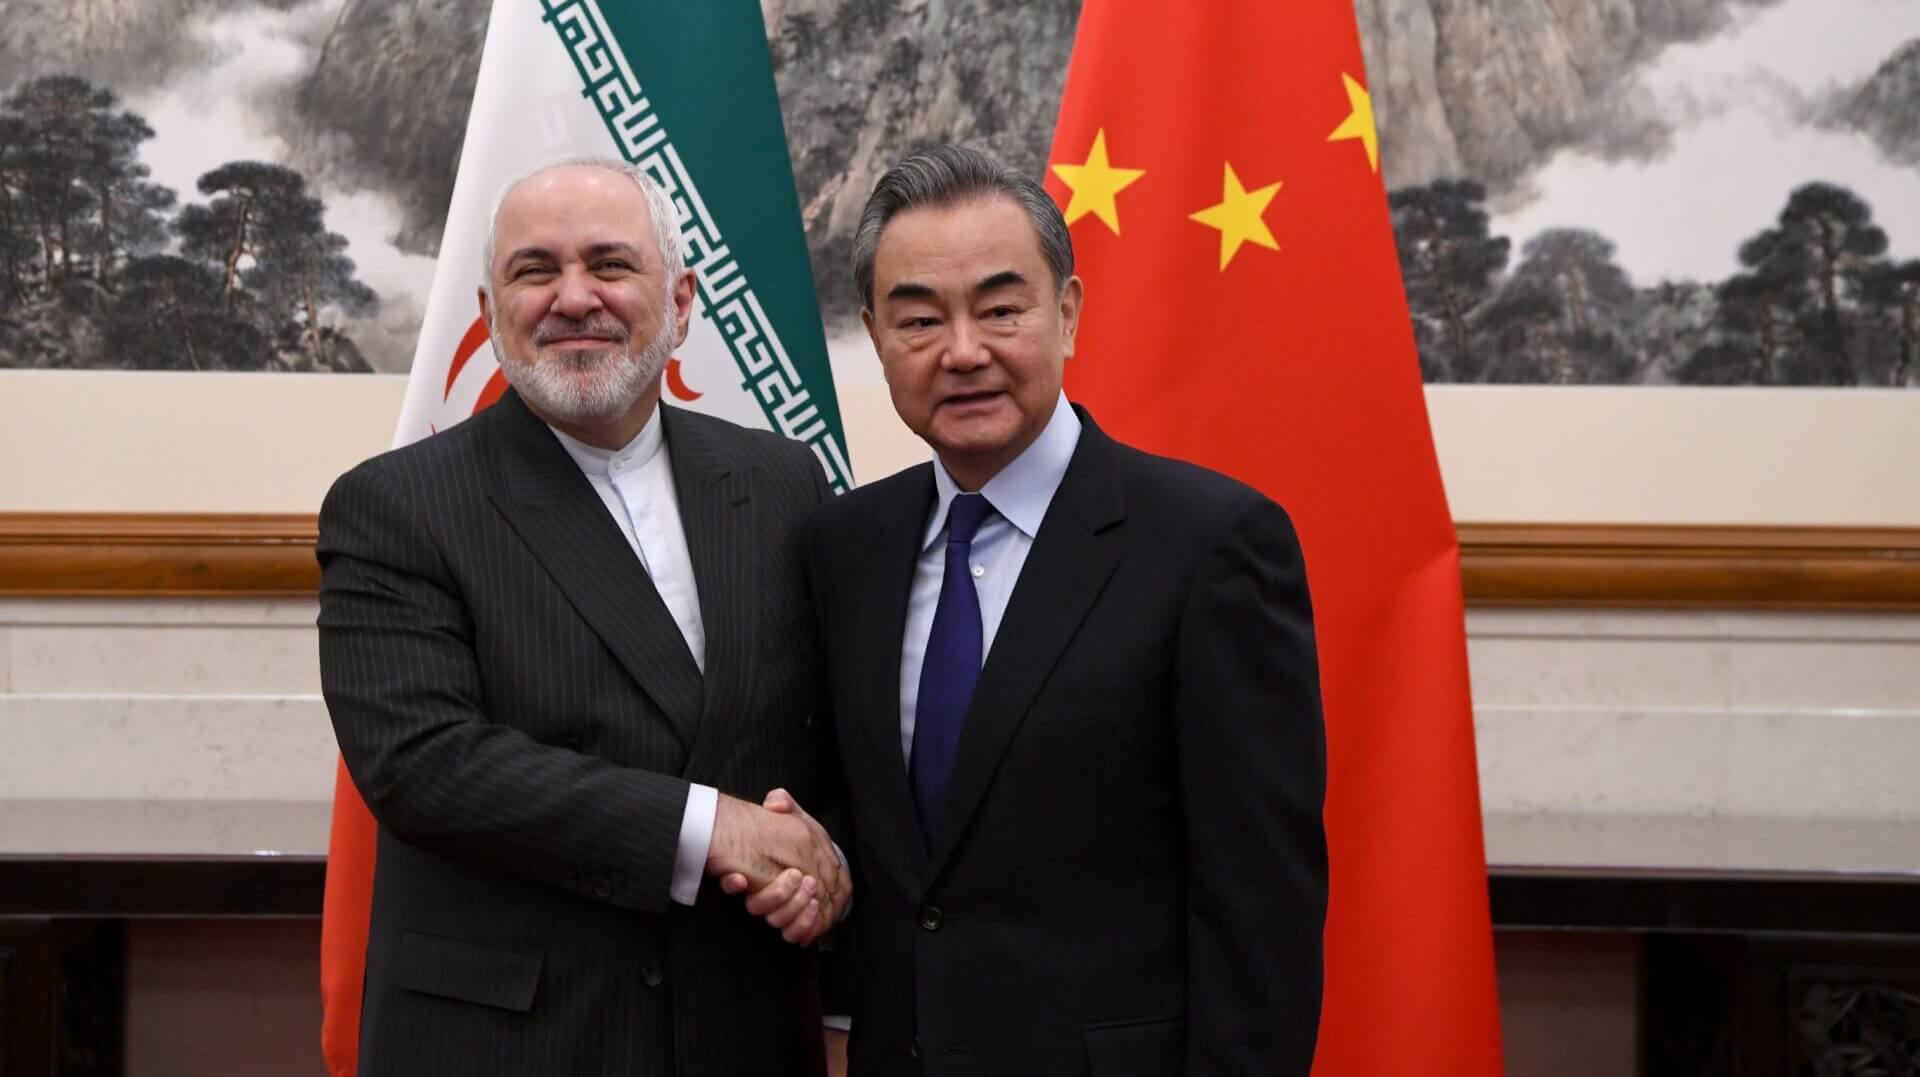 Leaked China-Iran Draft Agreement Turns Controversial